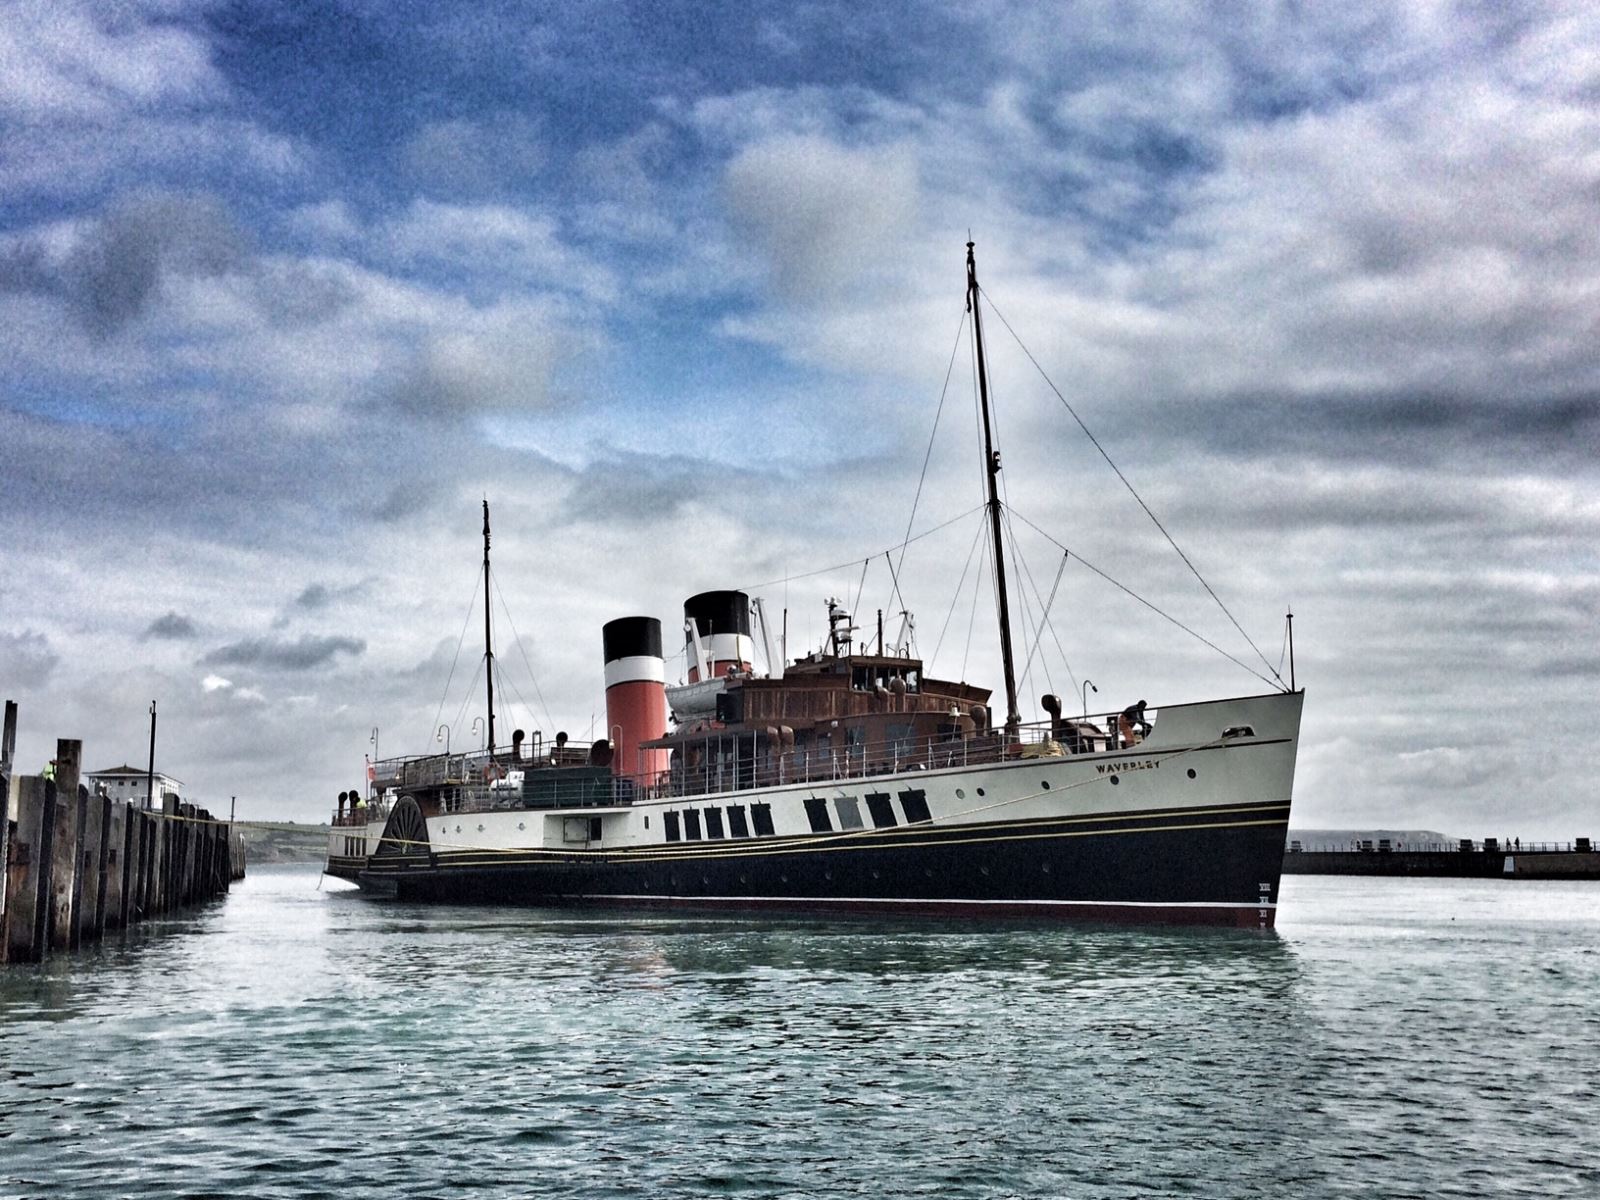 Waverley Paddlesteamer in Weymouth Harbour